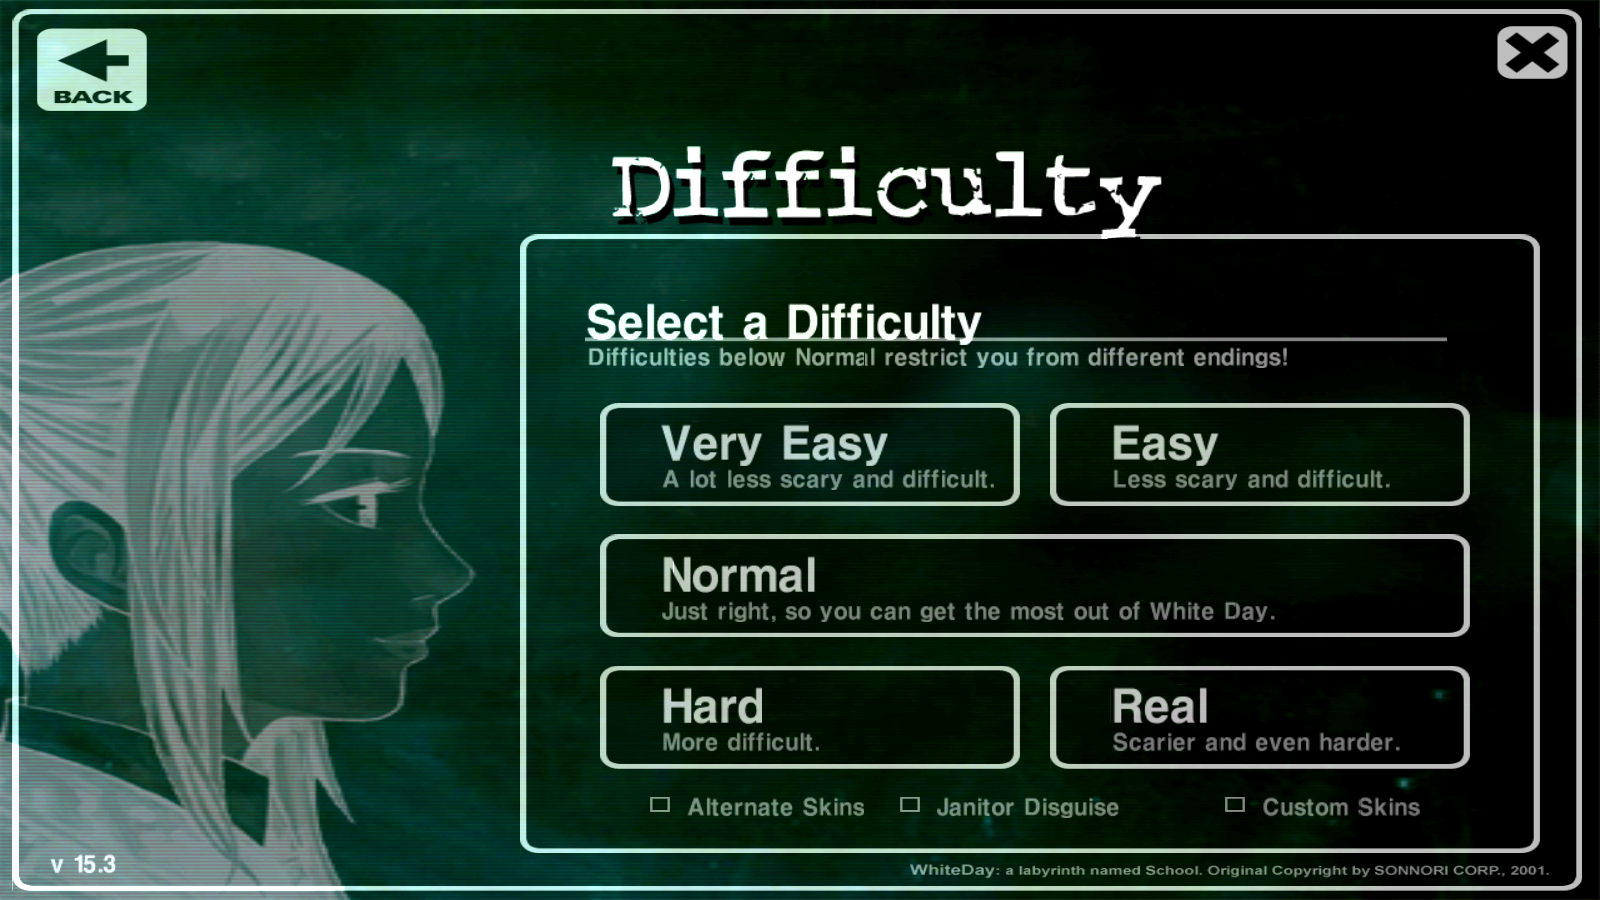 The game difficult am is are. Difficulty игра. Хард гейм. Select difficulty. White Day a Labyrinth named School 2001.